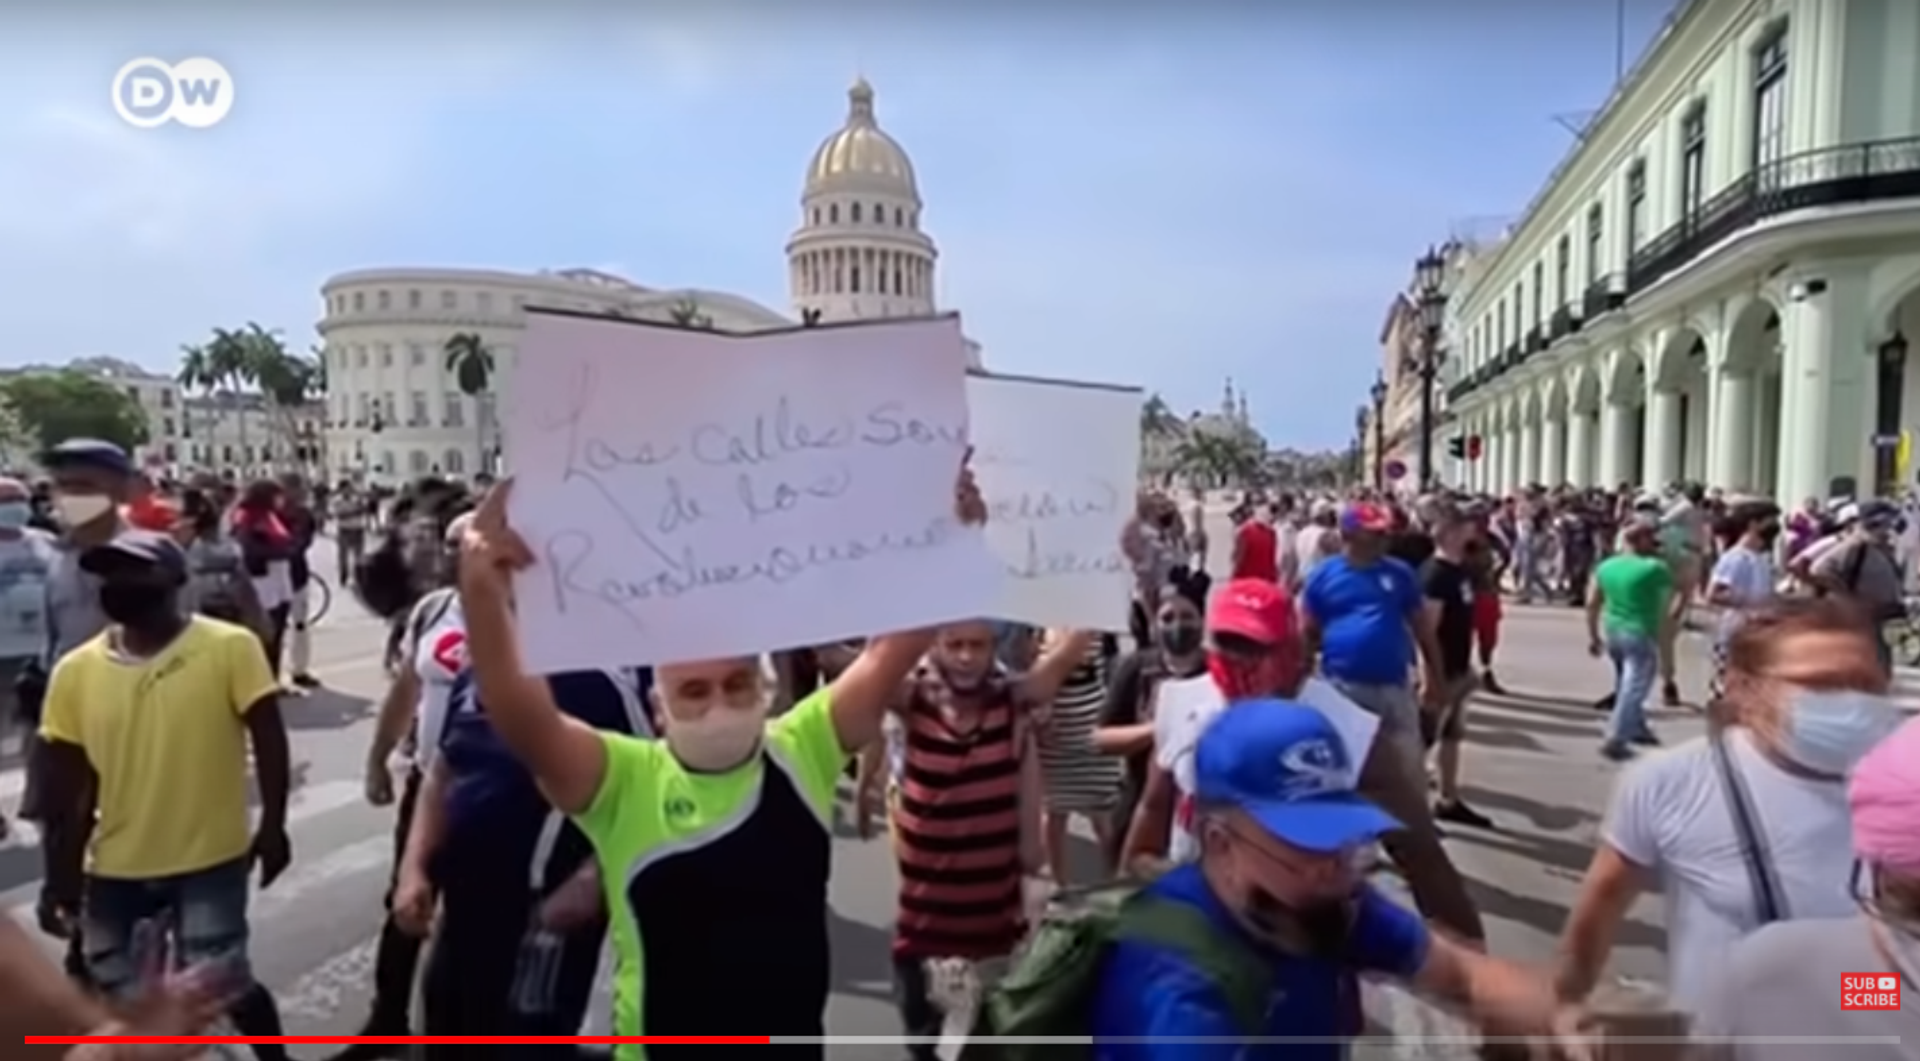 Screengrab of DW report on situation in Cuba, with posters carried by pro-government demonstrators left uncensored. - Sputnik International, 1920, 07.09.2021